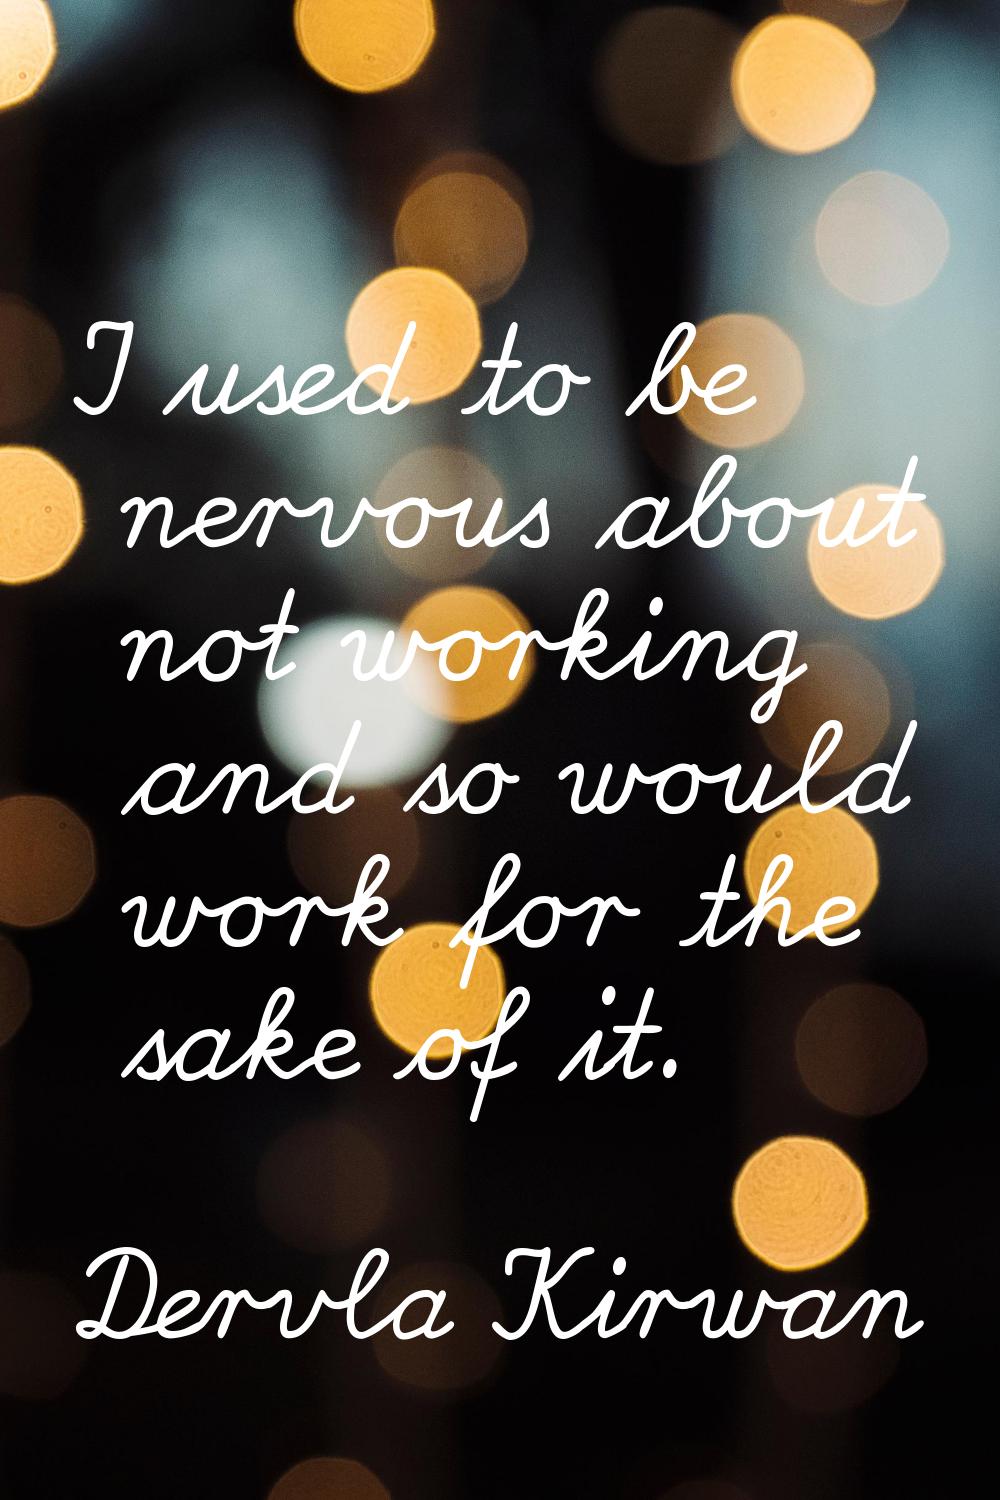 I used to be nervous about not working and so would work for the sake of it.